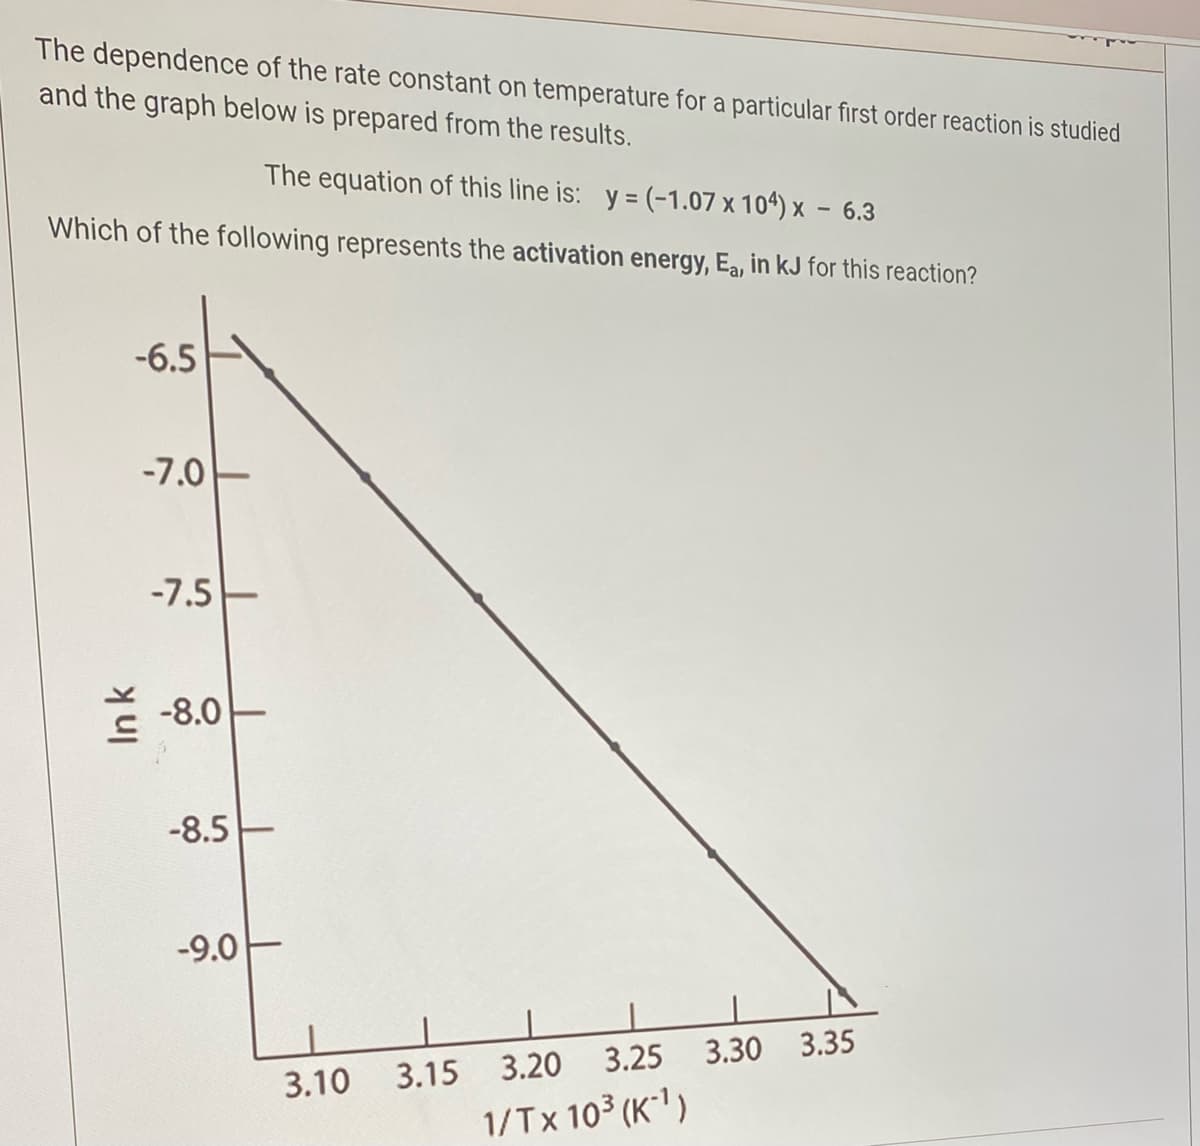 The dependence of the rate constant on temperature for a particular first order reaction is studied
and the graph below is prepared from the results.
The equation of this line is: y = (-1.07 x 104) x - 6.3
Which of the following represents the activation energy, Ea, in kJ for this reaction?
-6.5
Ink
-7.0
-7.5-
-8.0
-8.5
-9.0
1
3.10
3.15
3.20 3.25 3.30 3.35
1/Tx 10³ (K-¹)